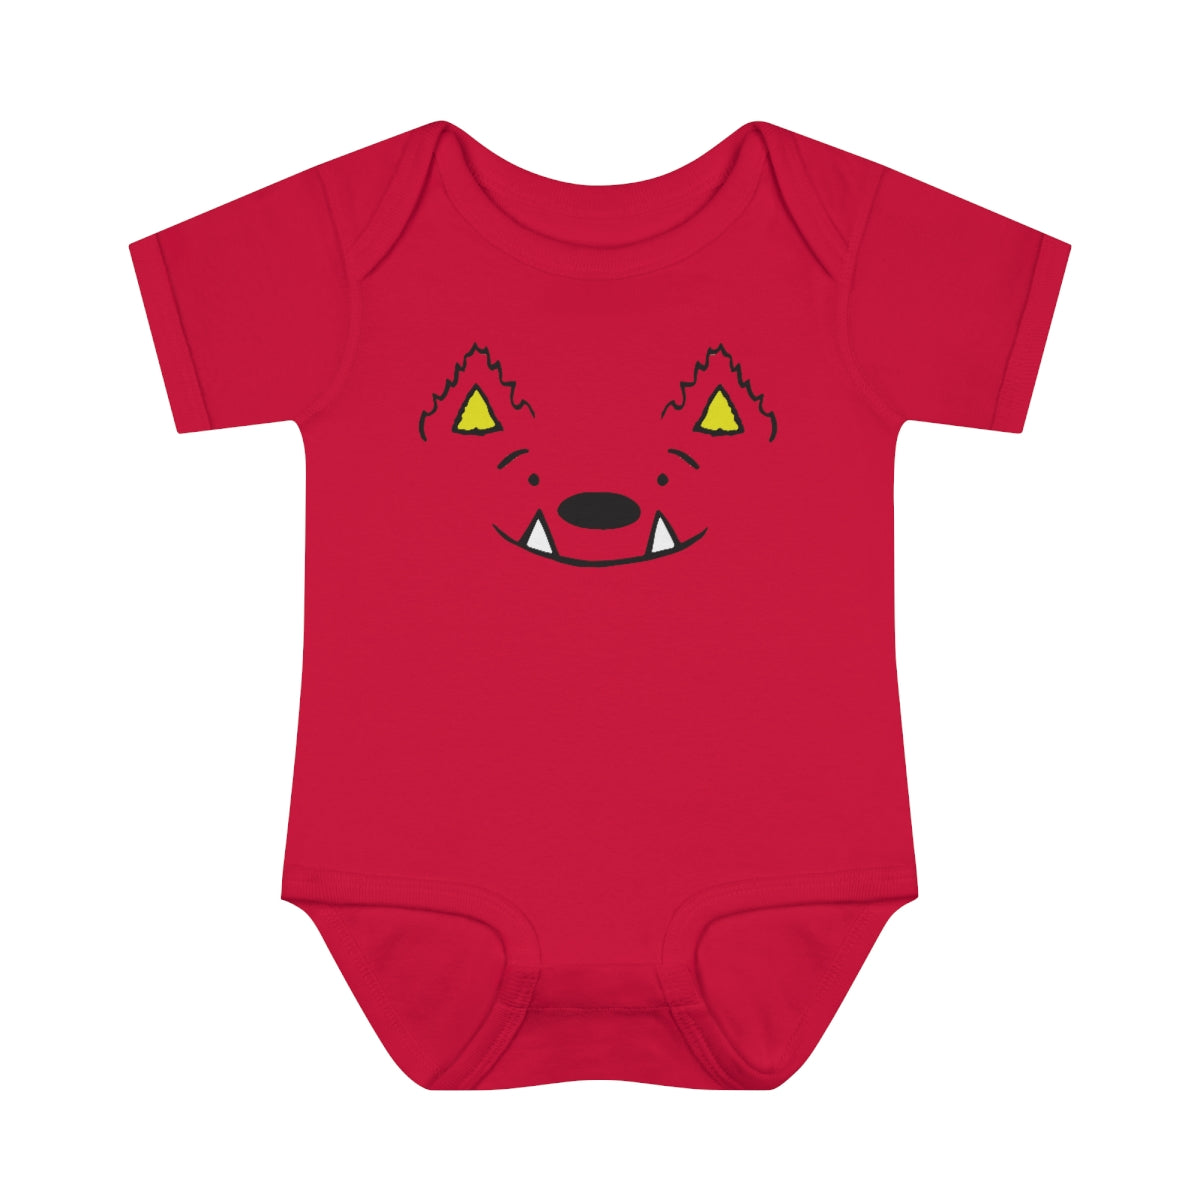 What if you CAN?! Infant Baby Rib Bodysuit